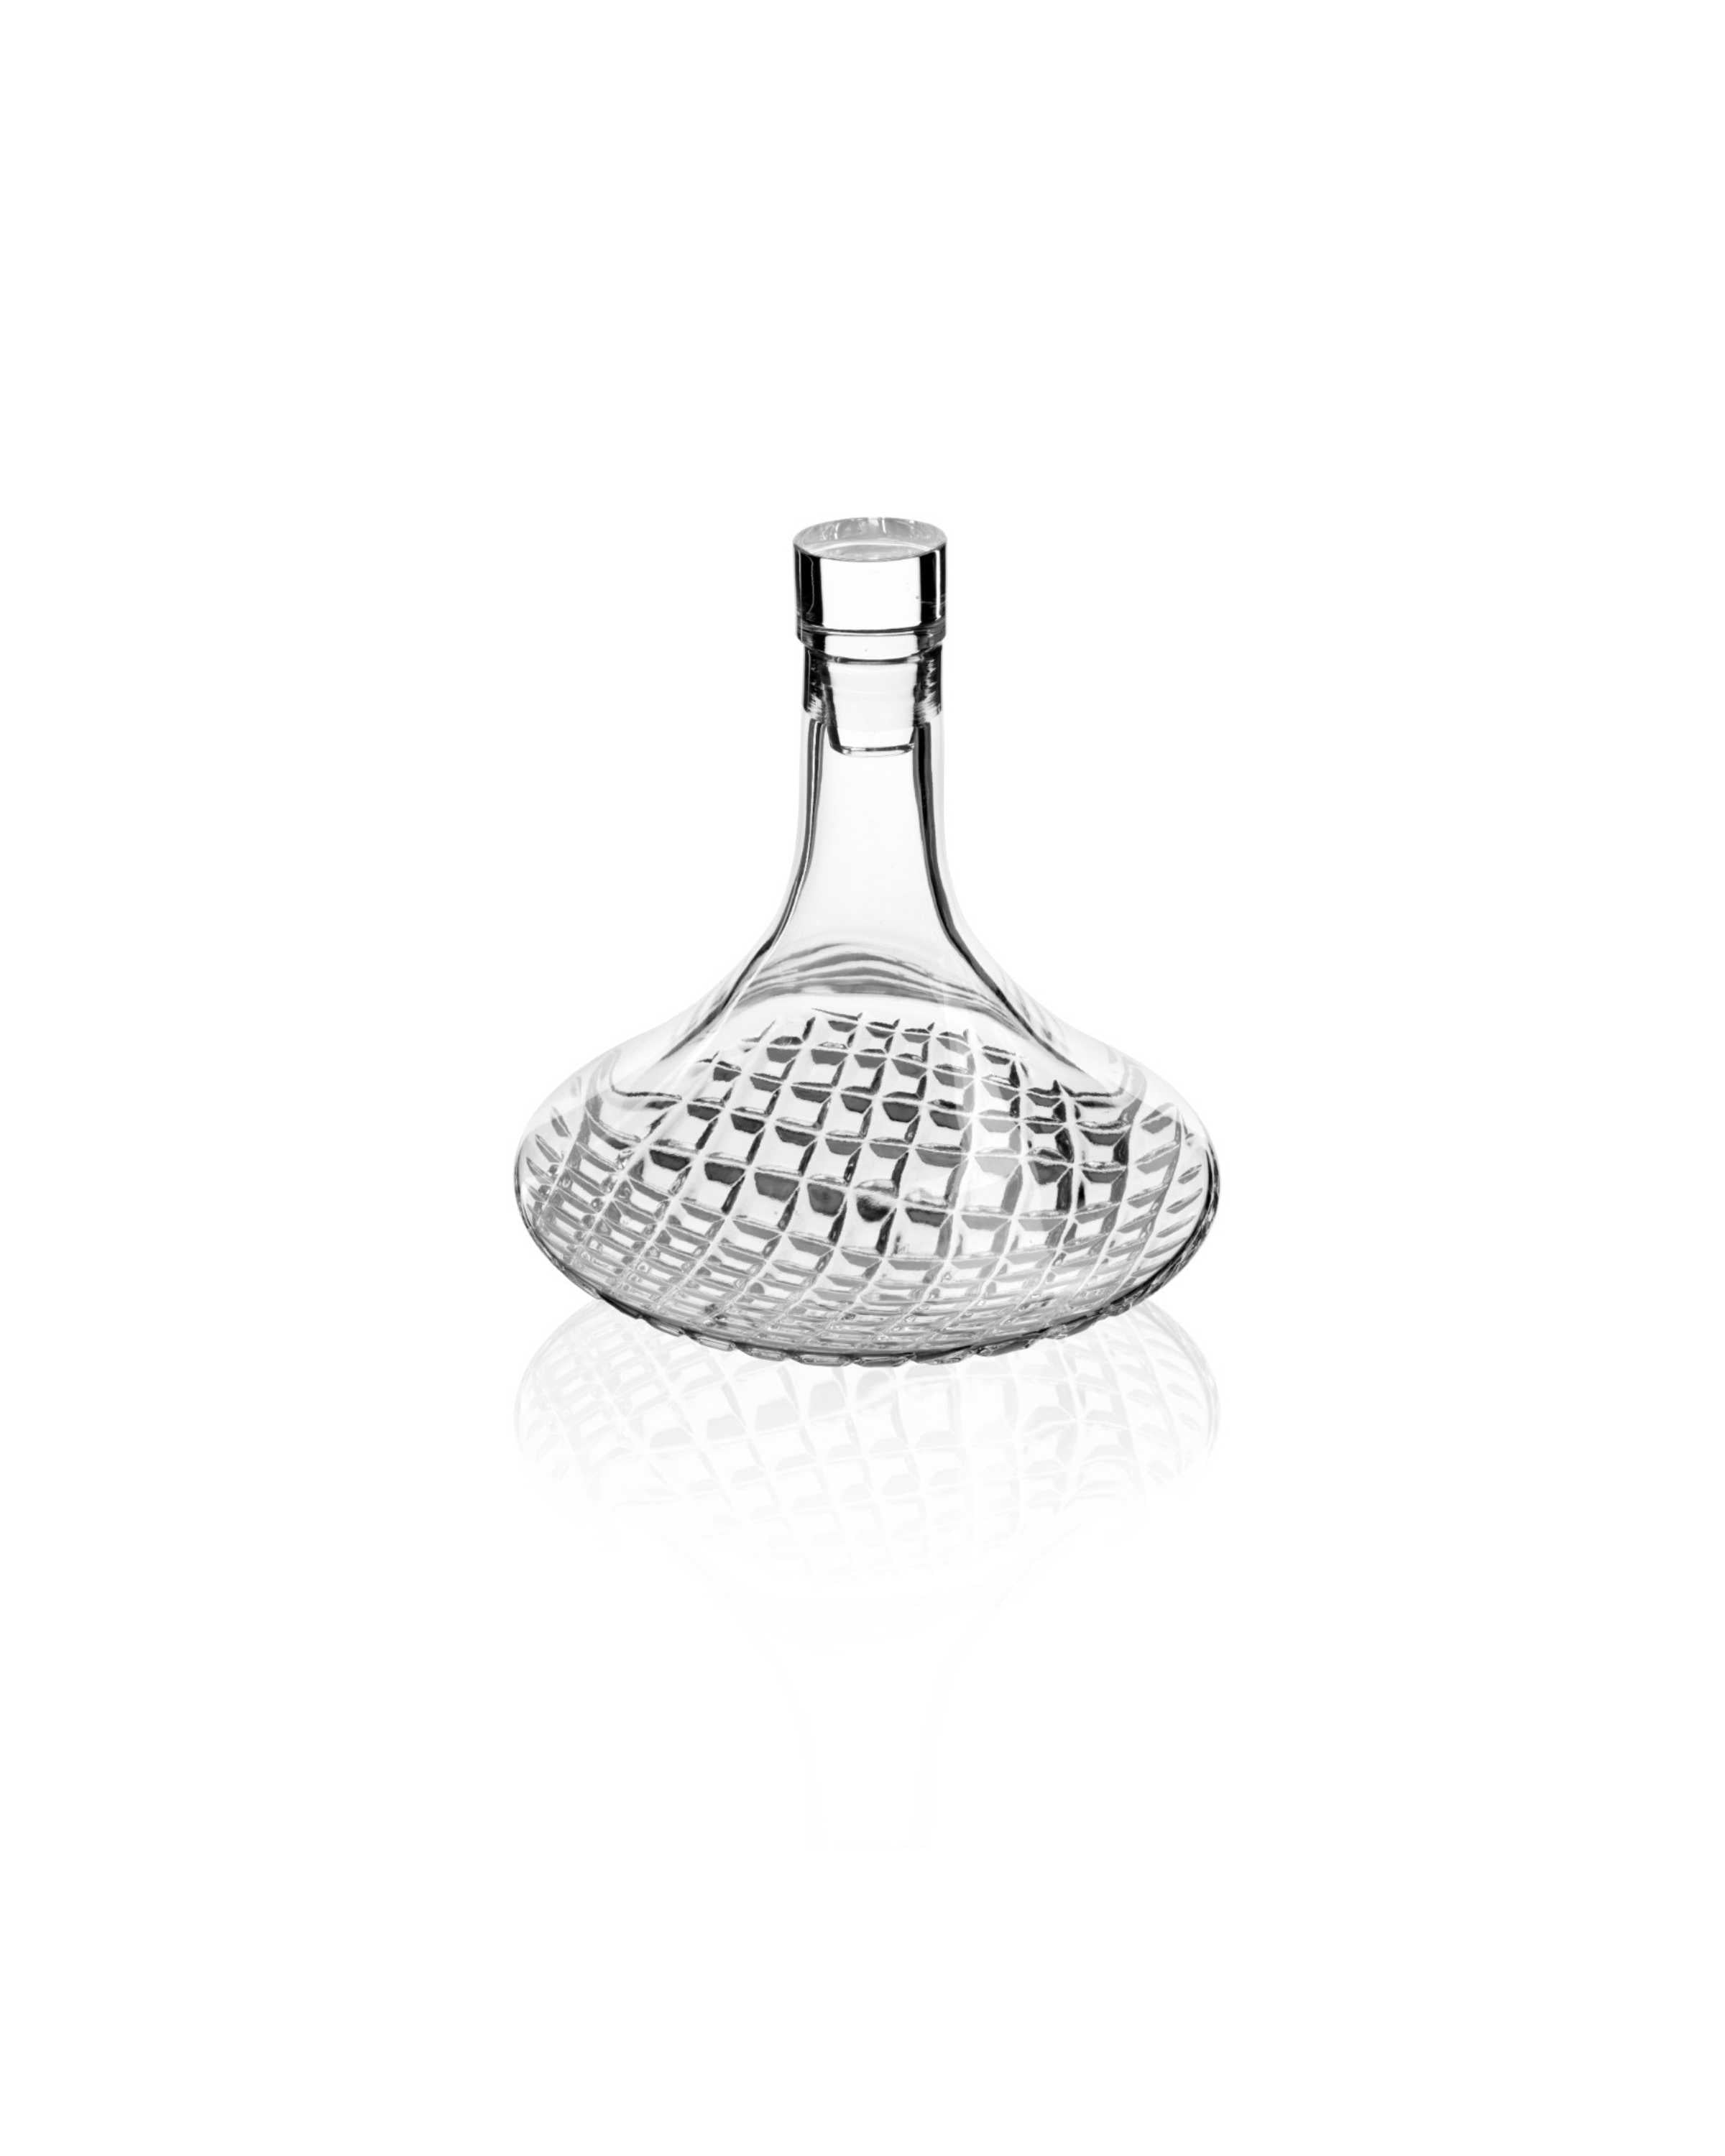 Buy Crystal Whiskey Decanter Online